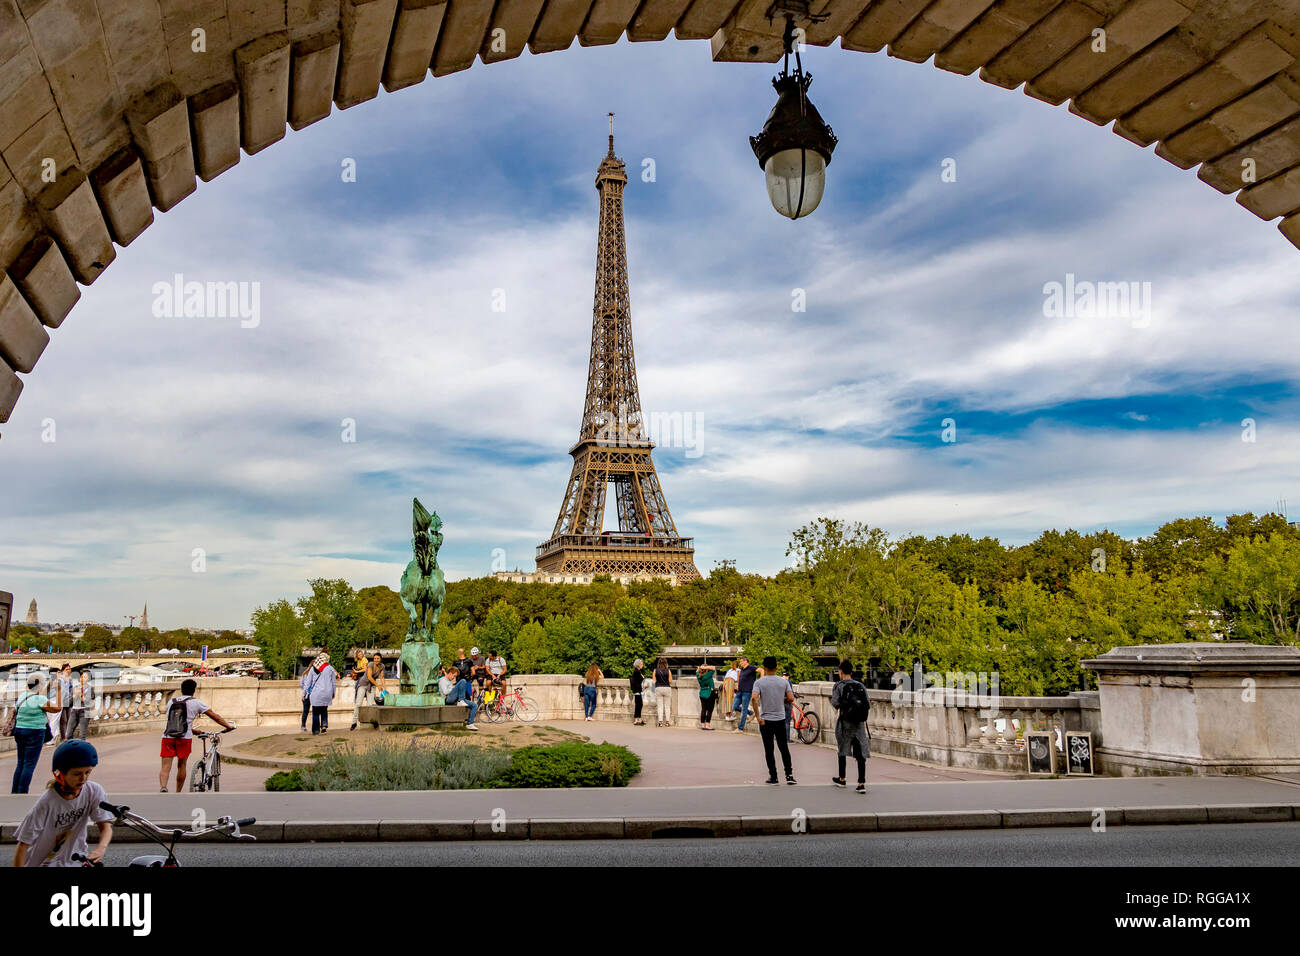 Looking through the archway of Bir-Hakeim Bridge at people on one of the outlooks admiring the spectacular  view of the Eiffel Tower,Paris Stock Photo